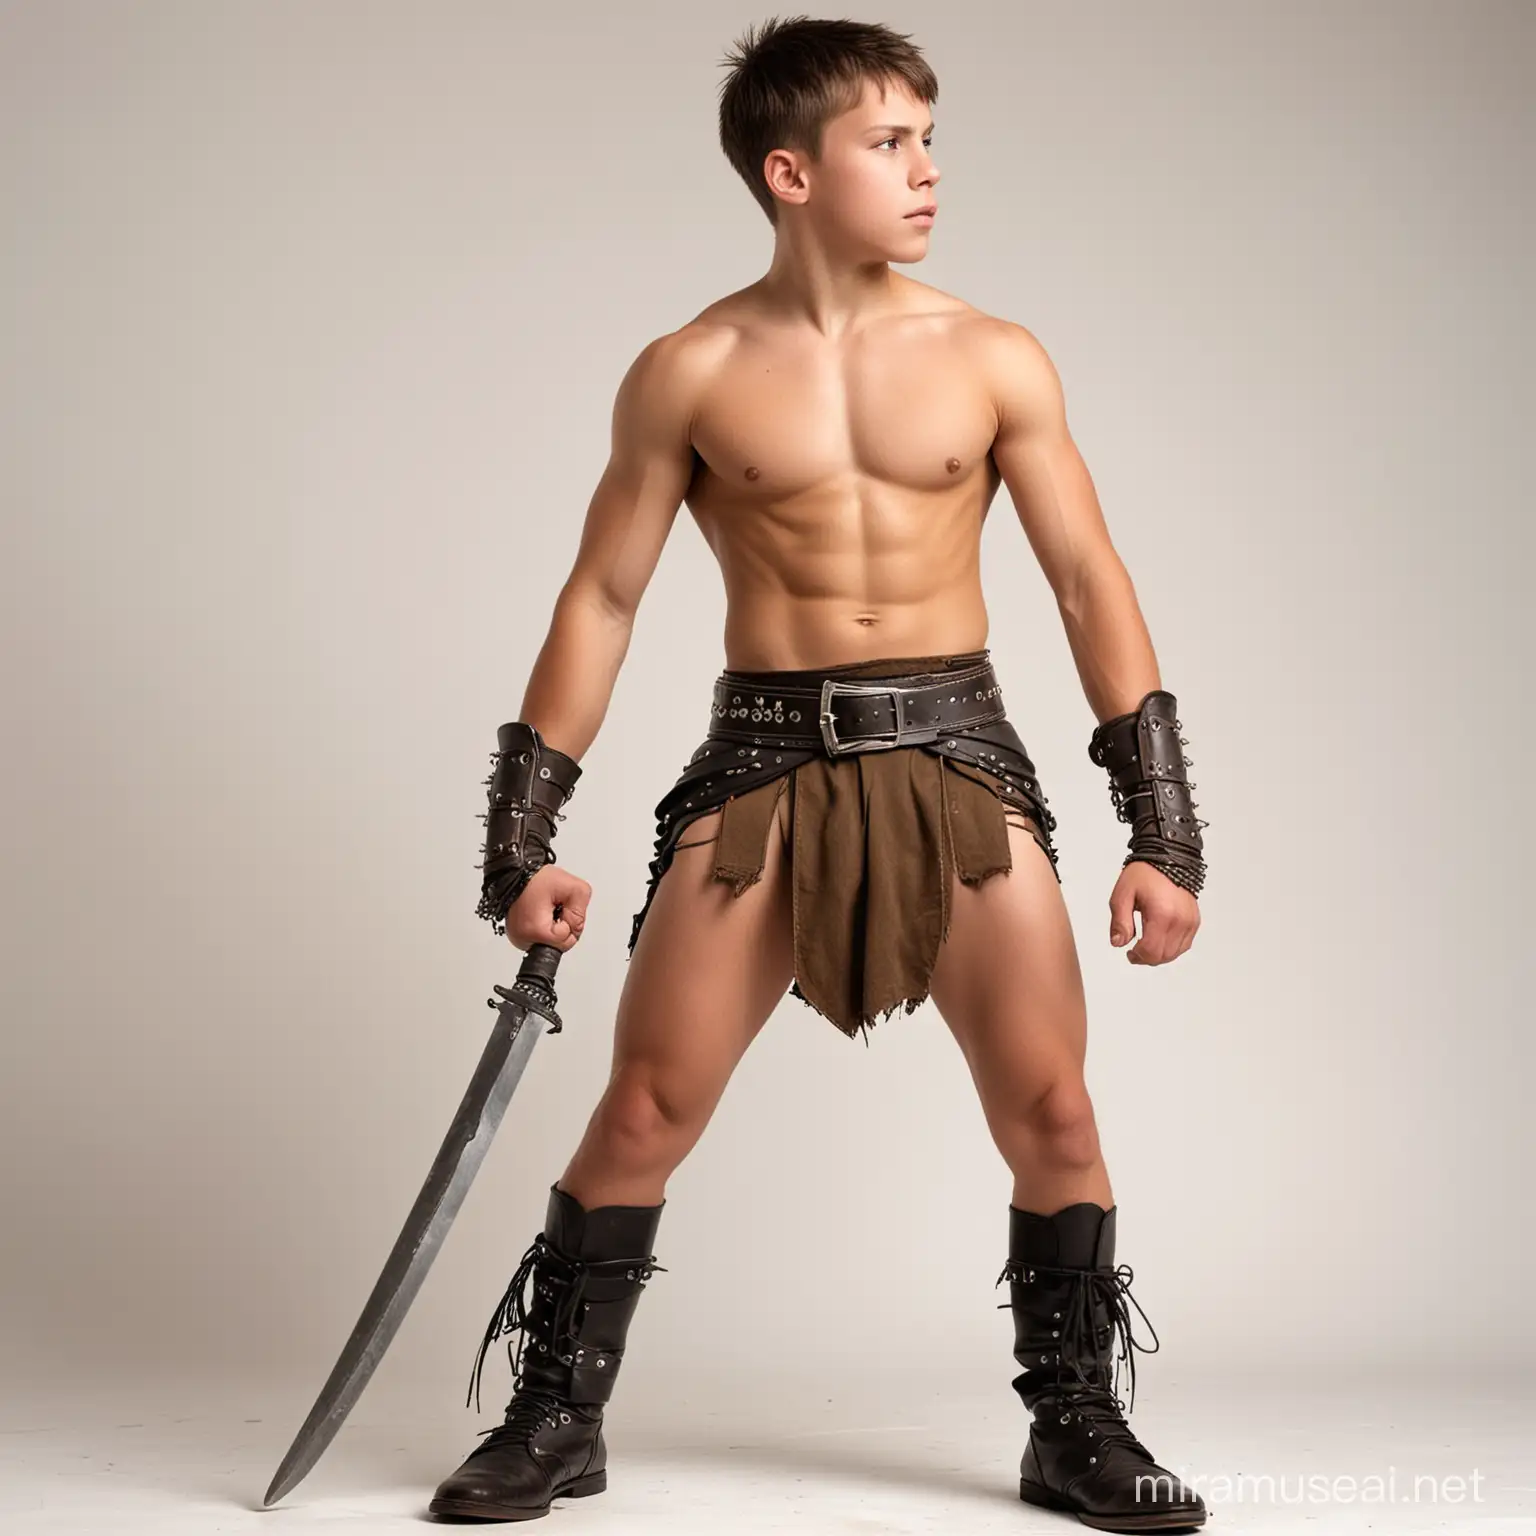 A very young shirtless muscular teenage boy warrior seen in profile, wearing a very short loincloth with a big leather belt and boots, white background.